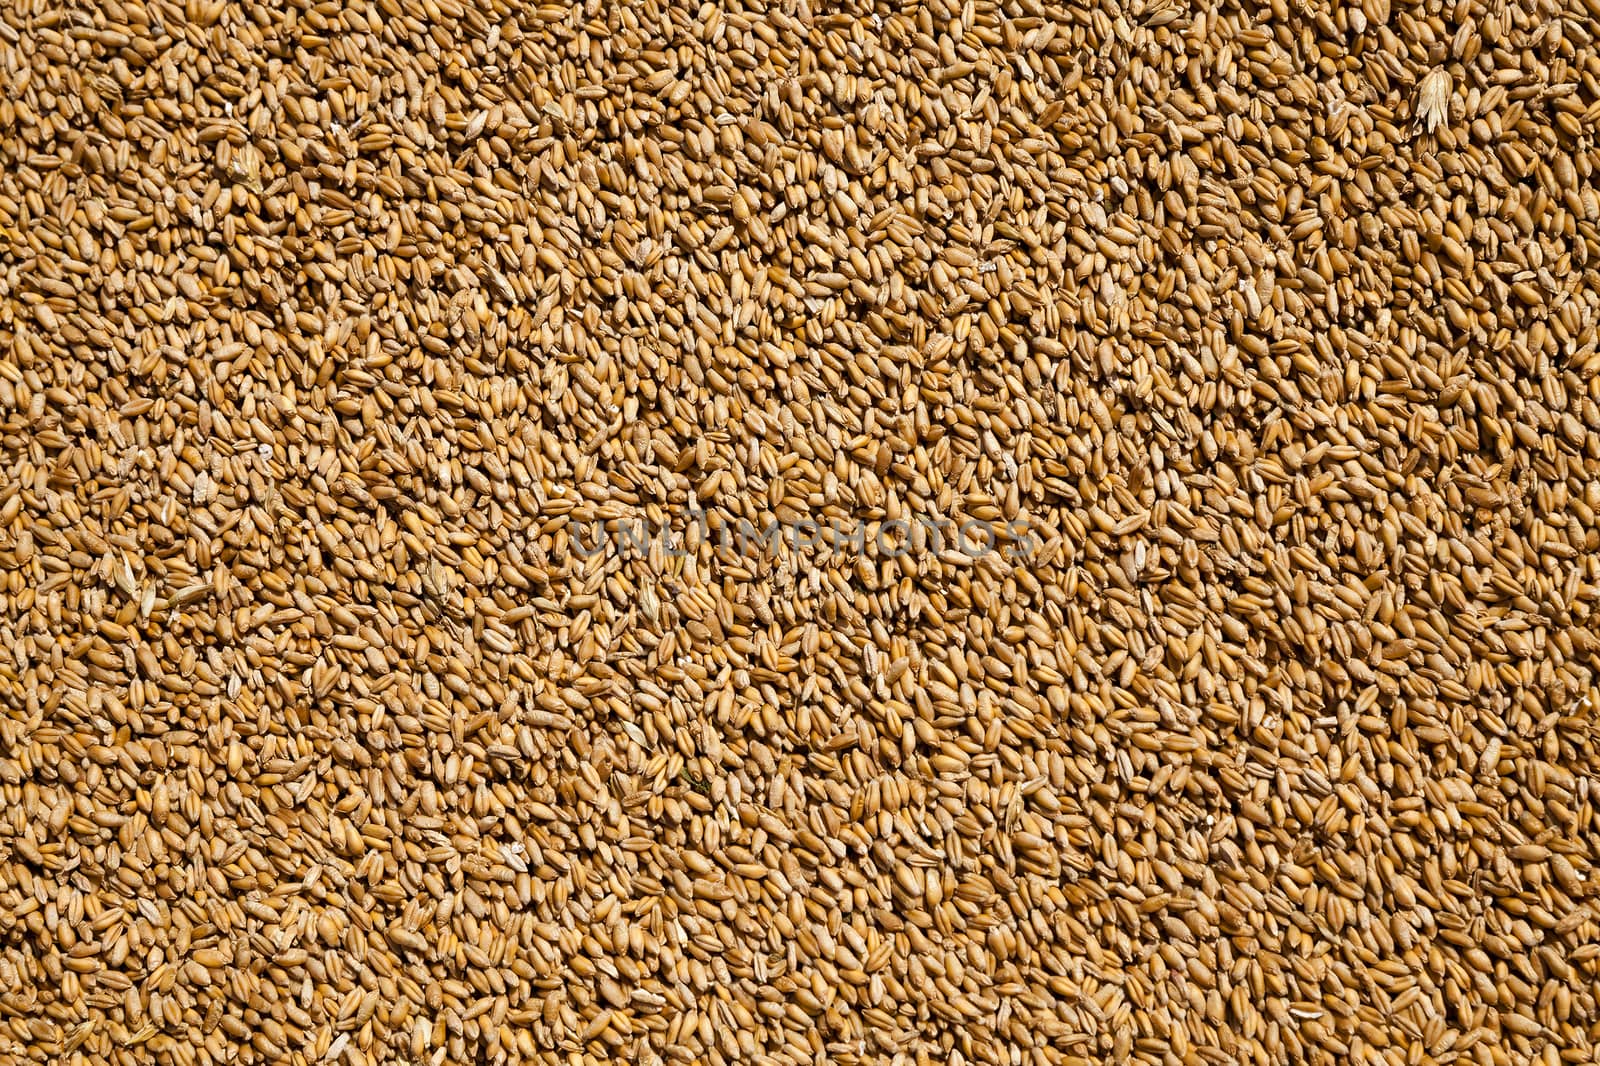   the grains of wheat collected in heaps during harvesting